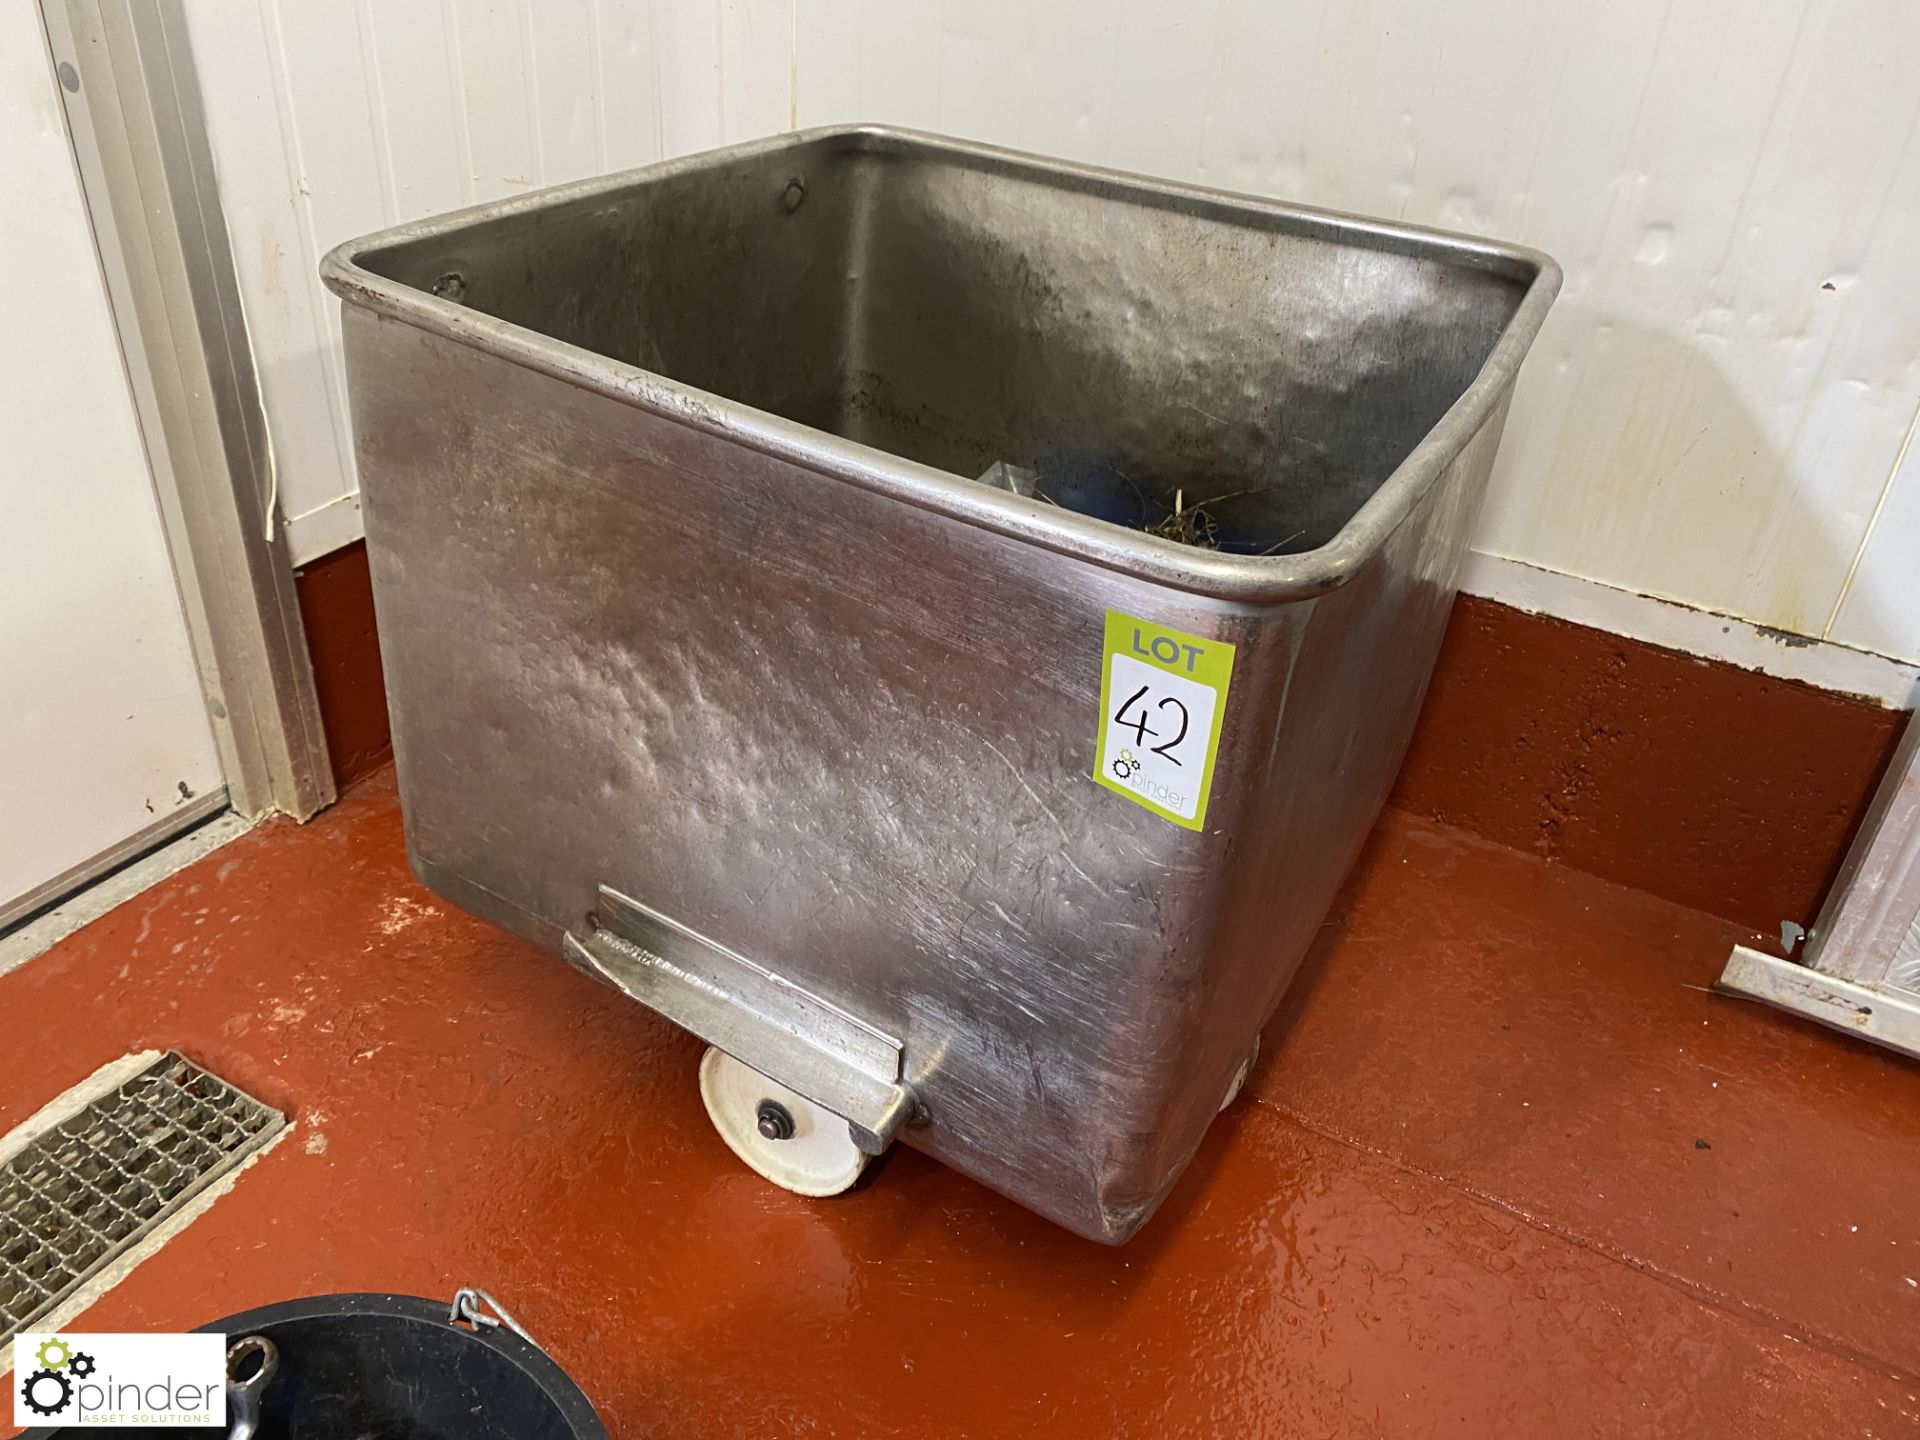 Stainless steel Ingredients Bin, 660mm x 670mm x 690mm (Lift Out Fee: £10 plus VAT) - Image 2 of 3